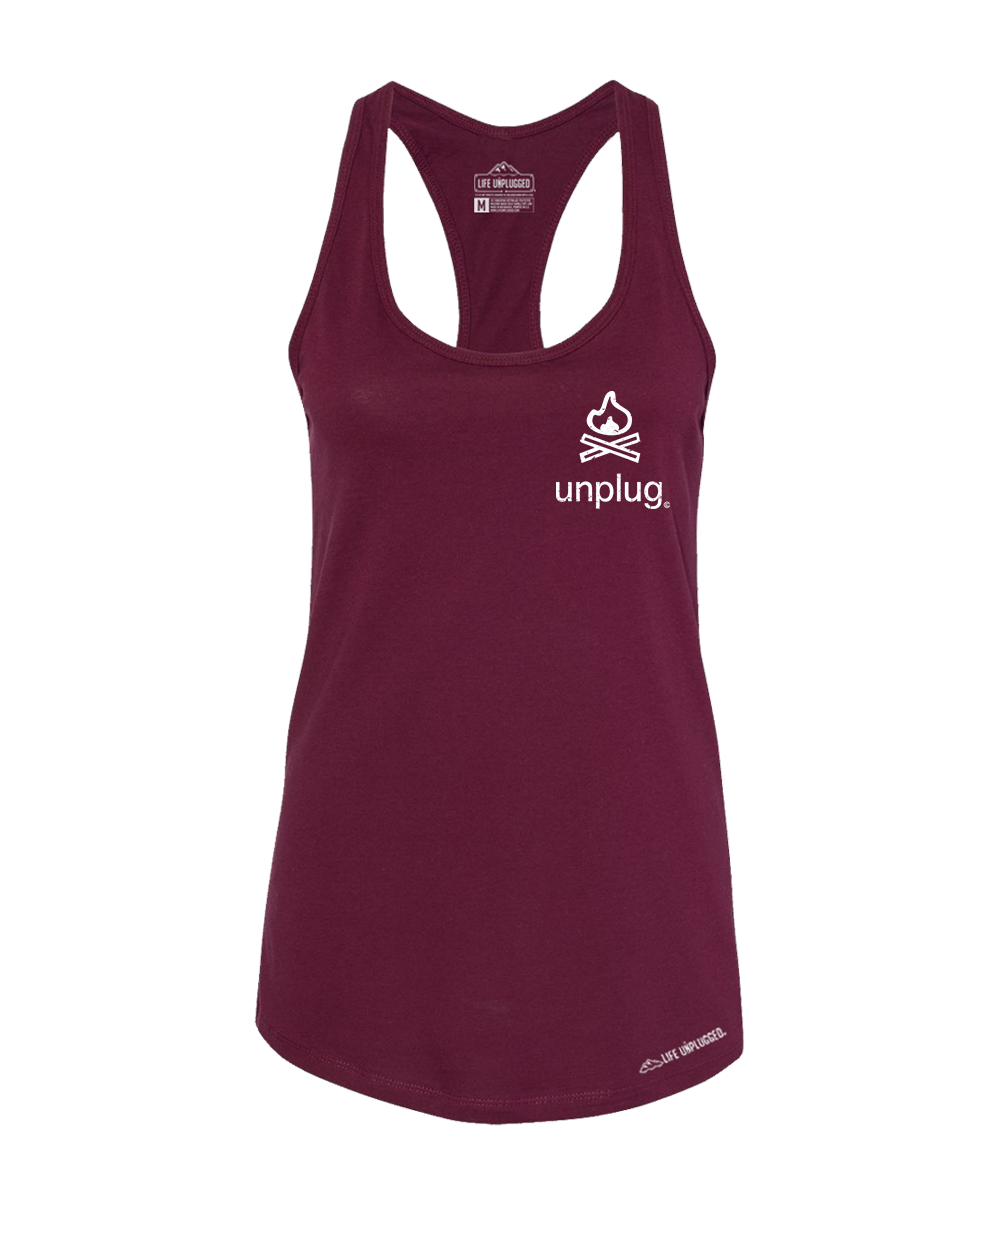 Campfire Left Chest Premium Women's Relaxed Fit Racerback Tank Top - Life Unplugged